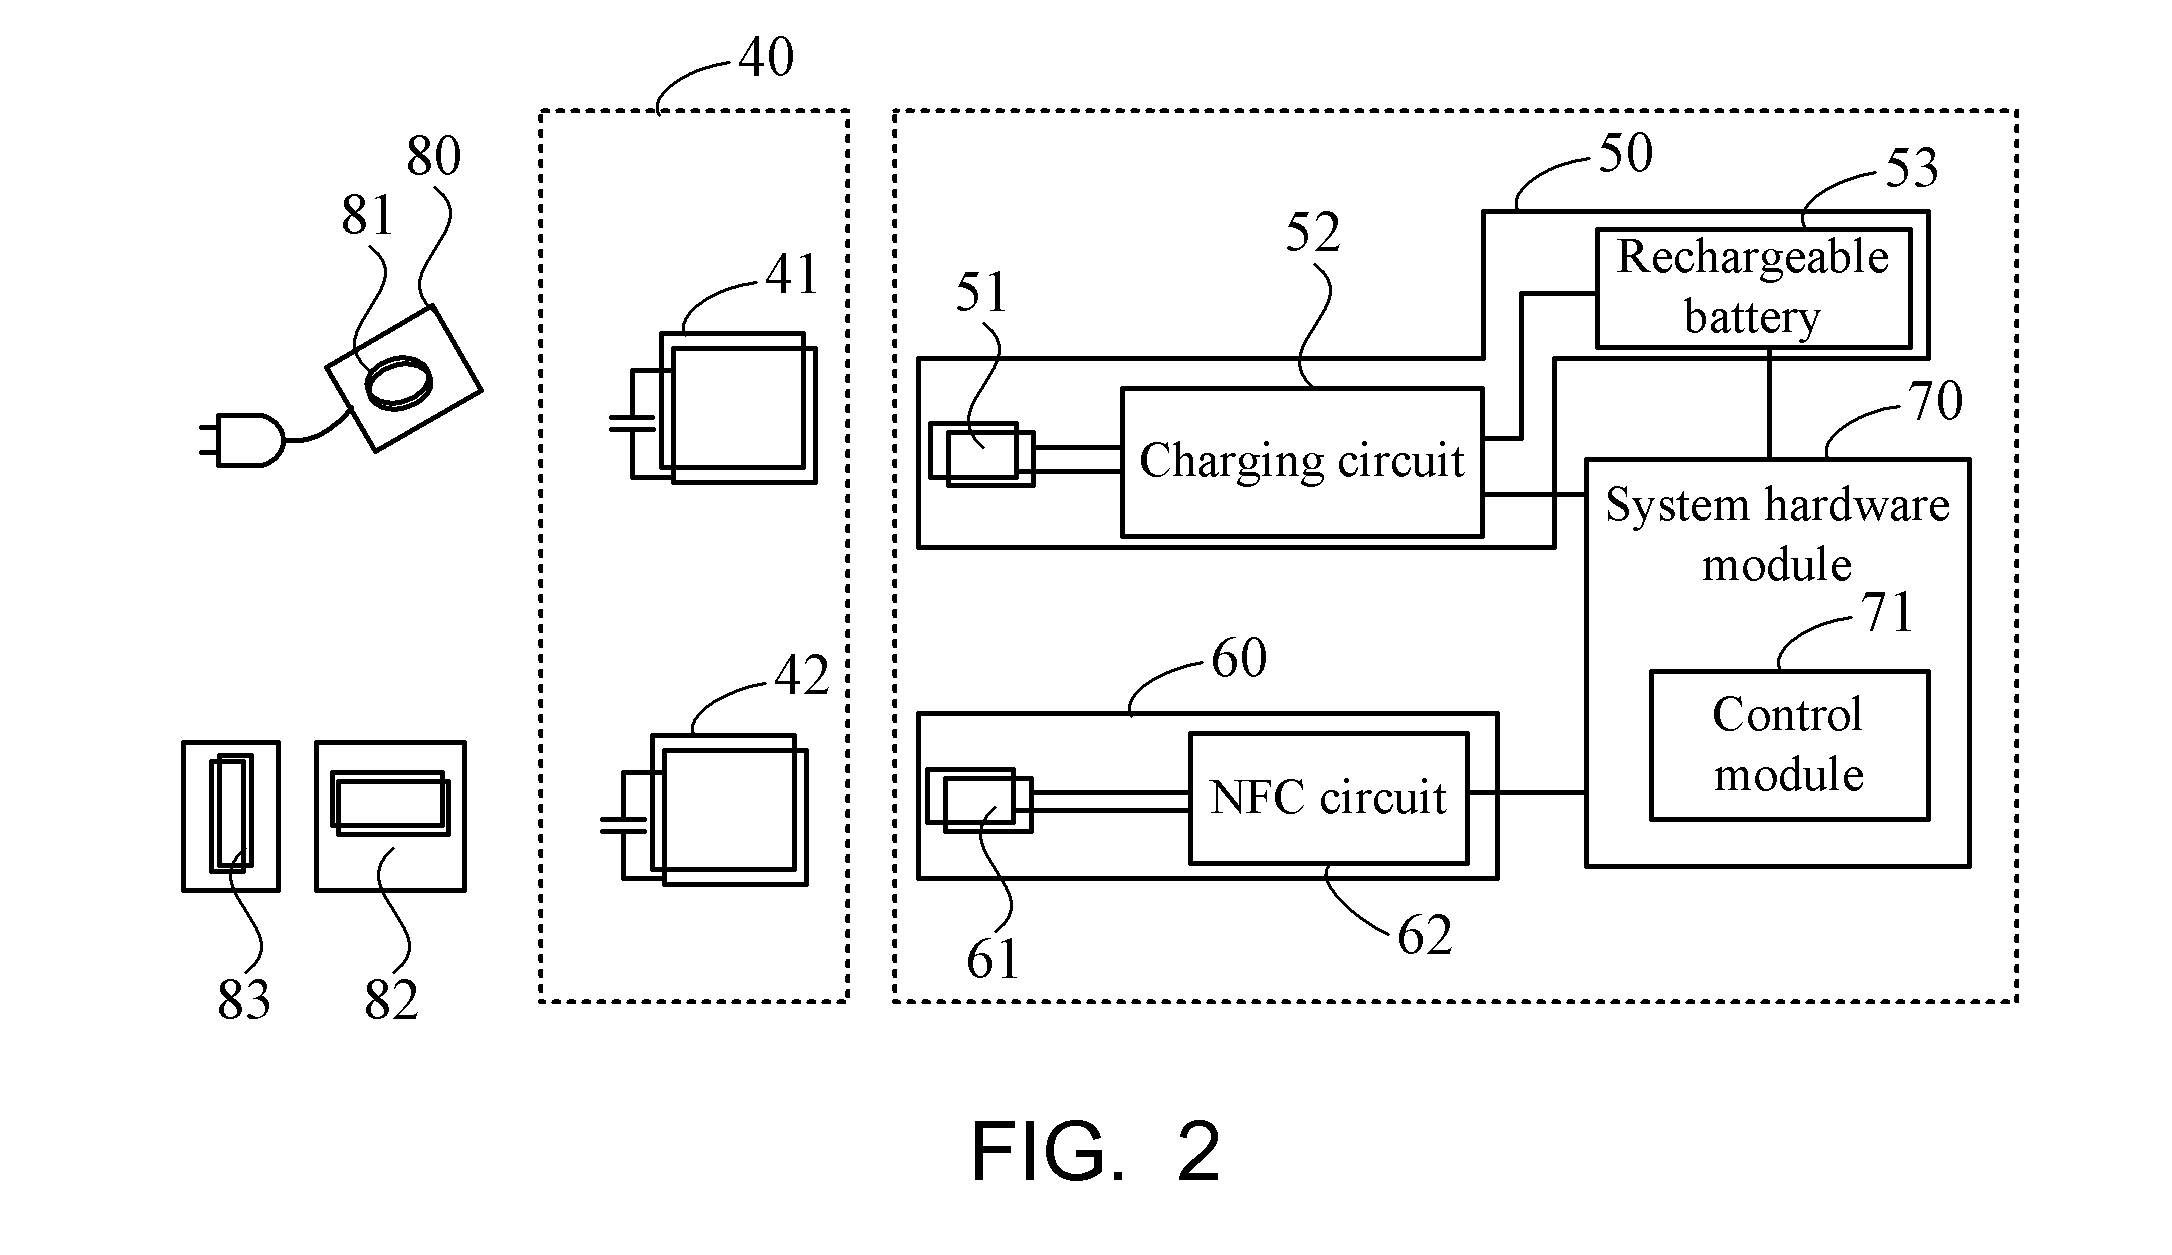 Portable electronic device capable of expanding transmission distance for near field communication functions